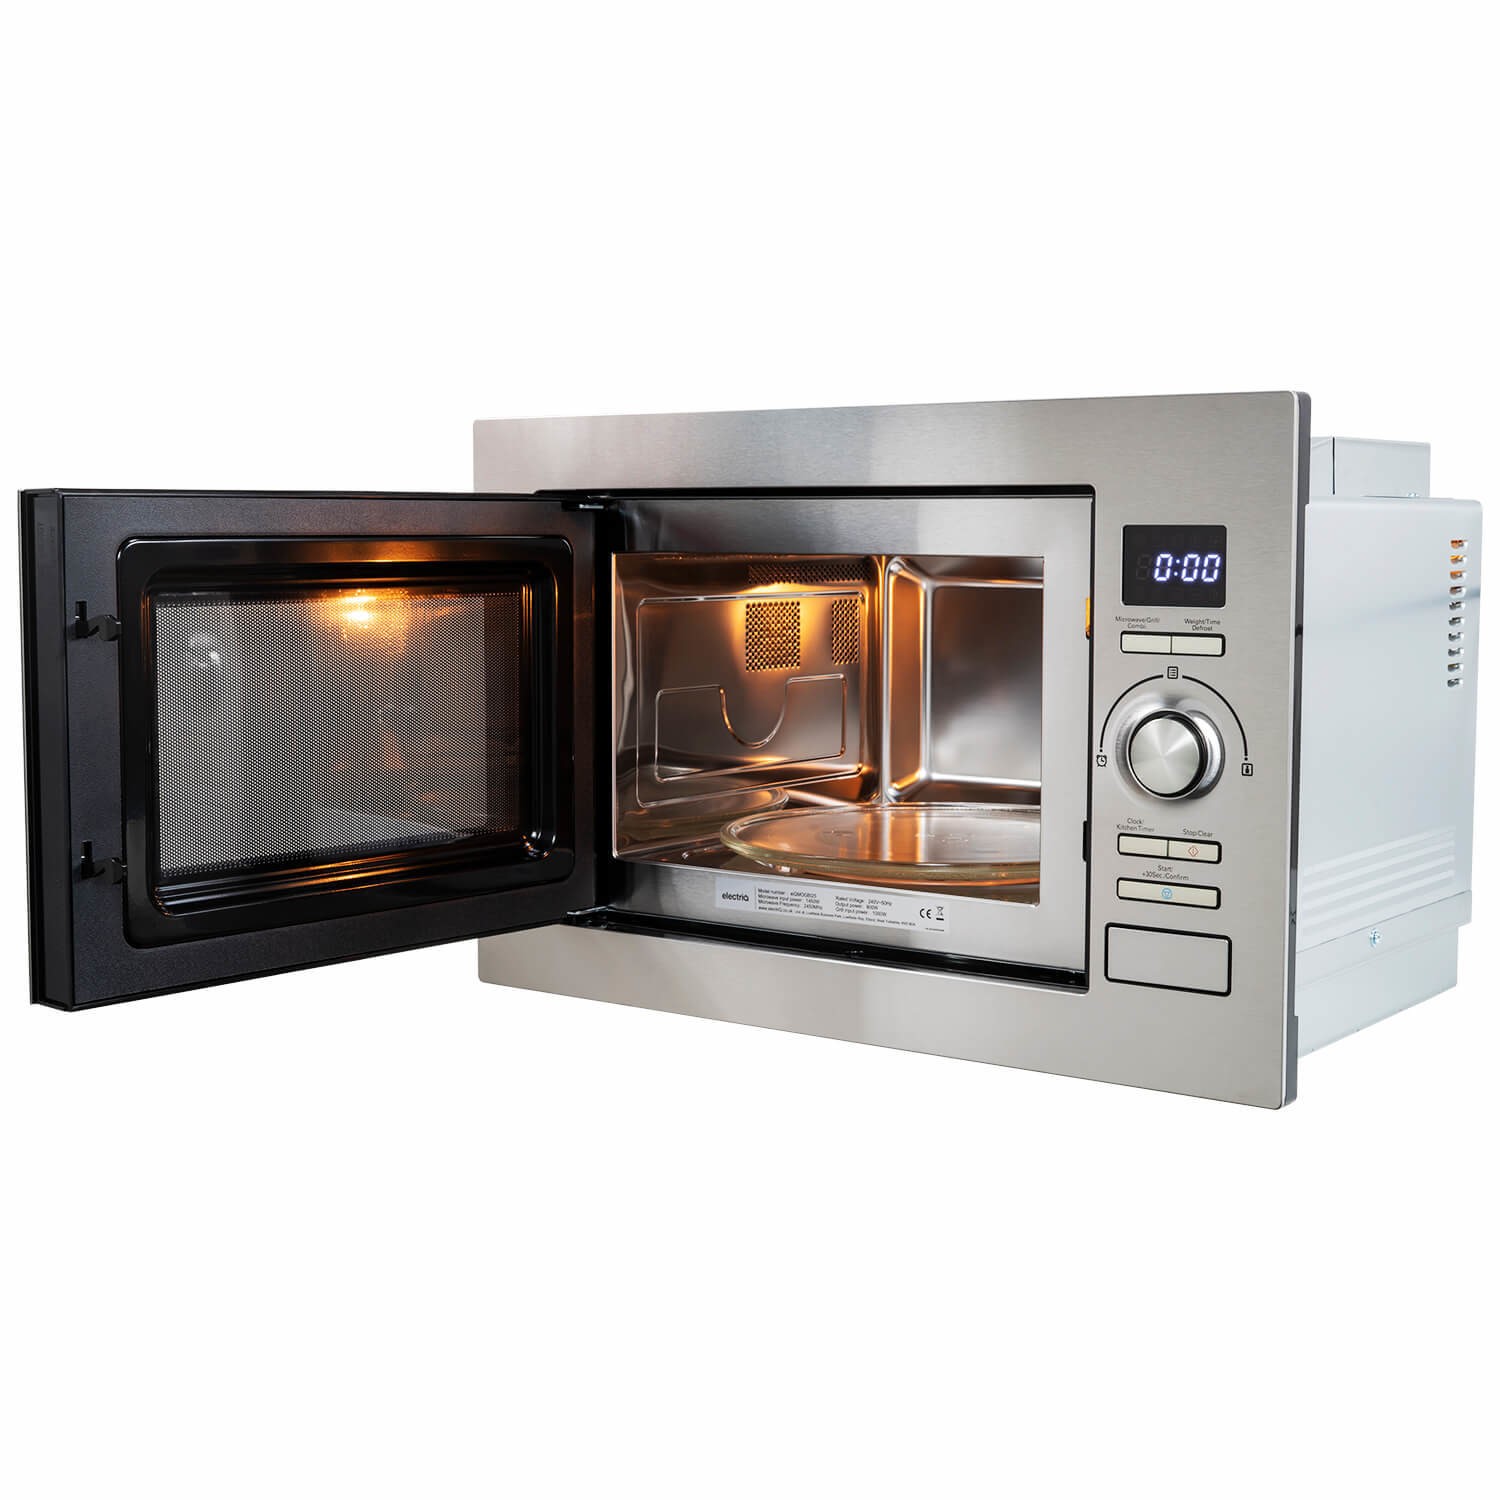 Breville Breville BRMC2516 900W 25L Combination Microwave with Grill Silver 5057753262839 